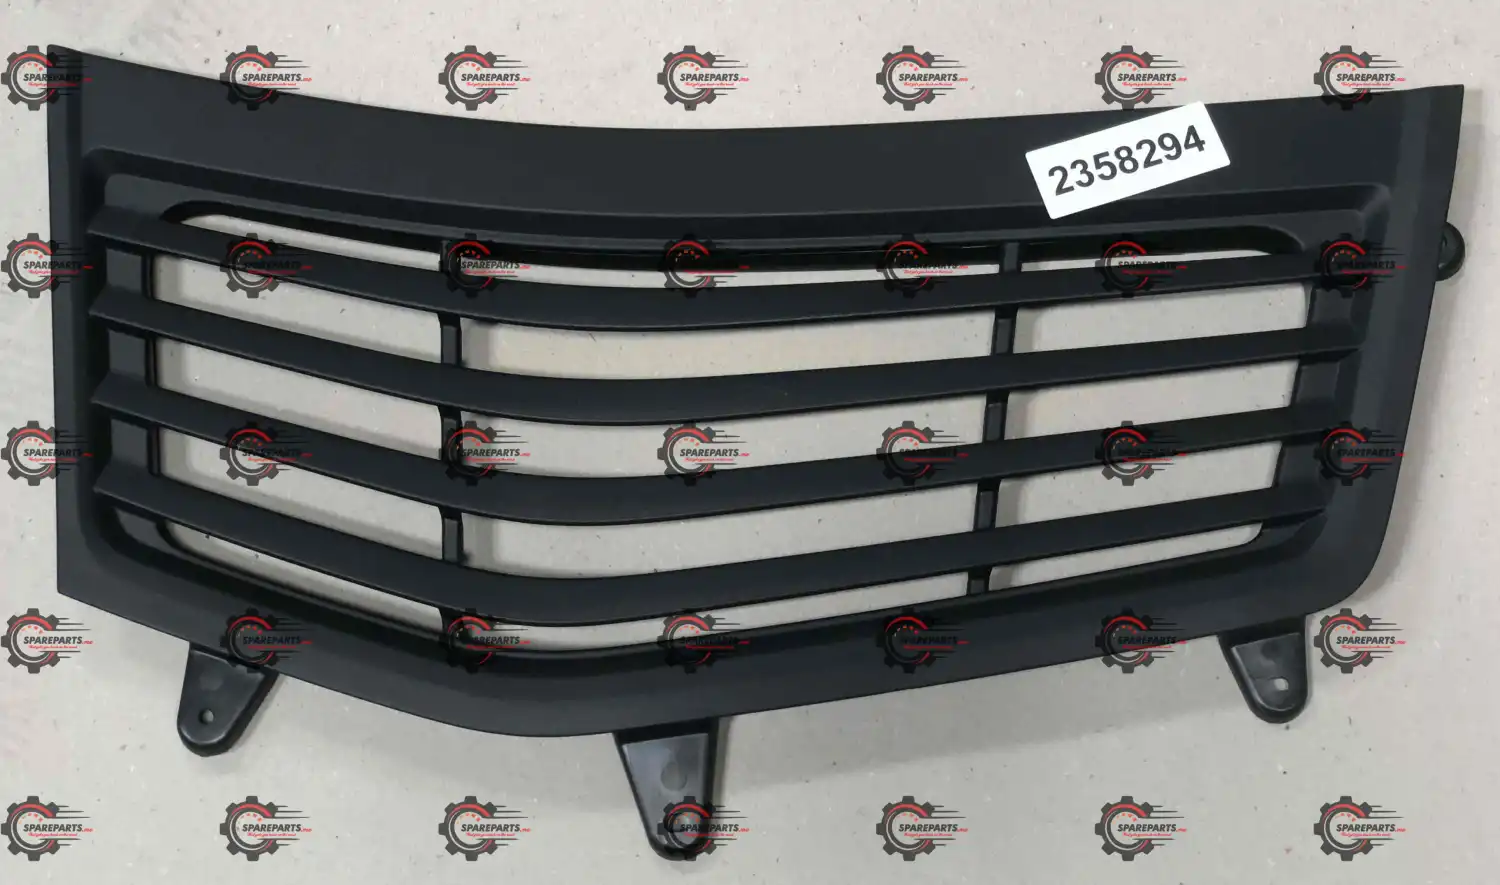 Scania grille 2358294